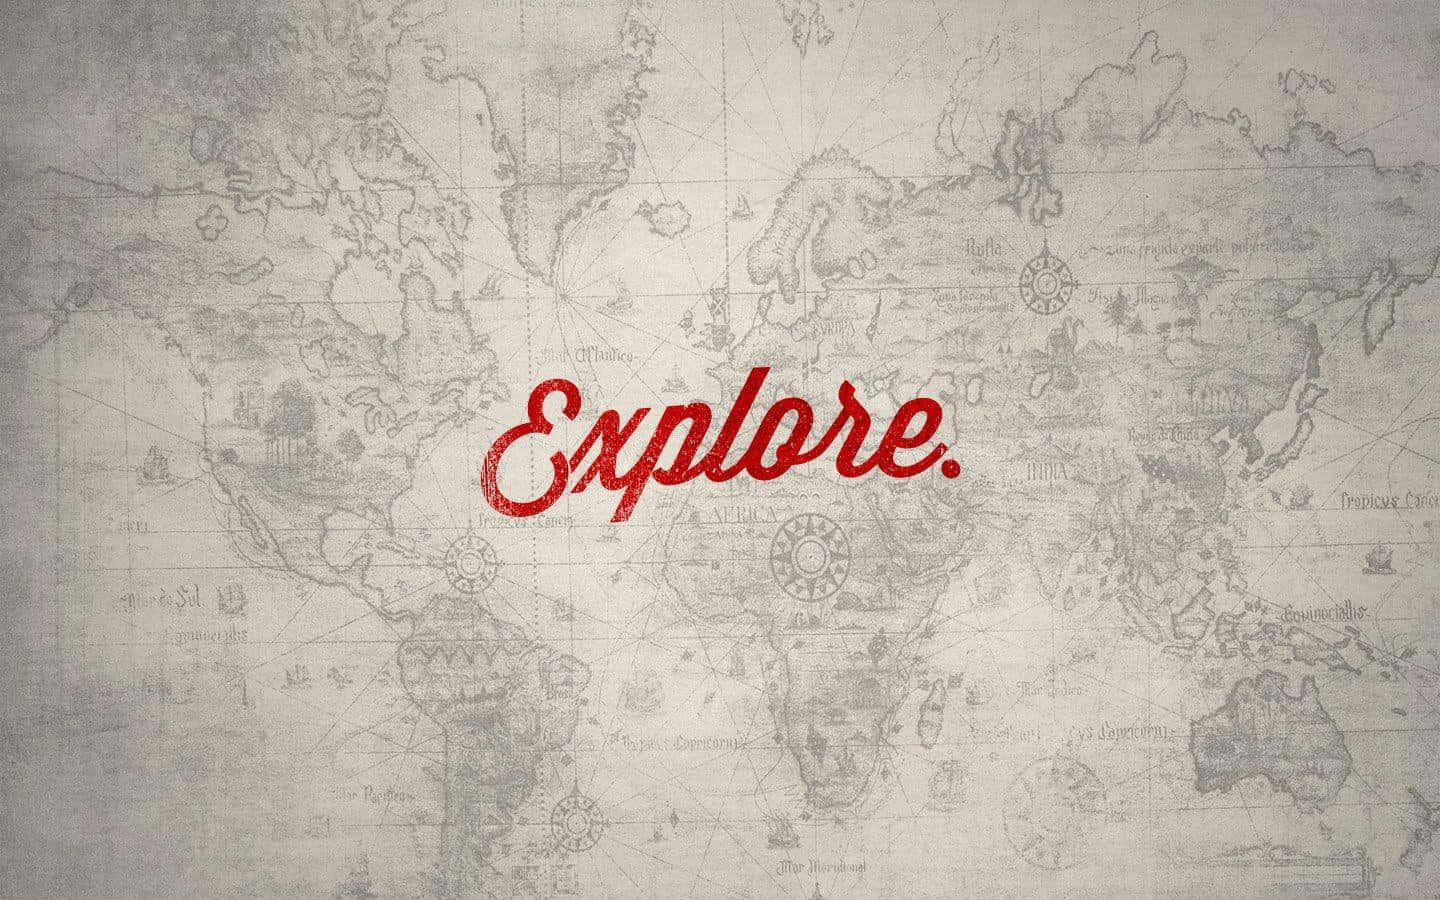 Explore - A Map With The Word Explore